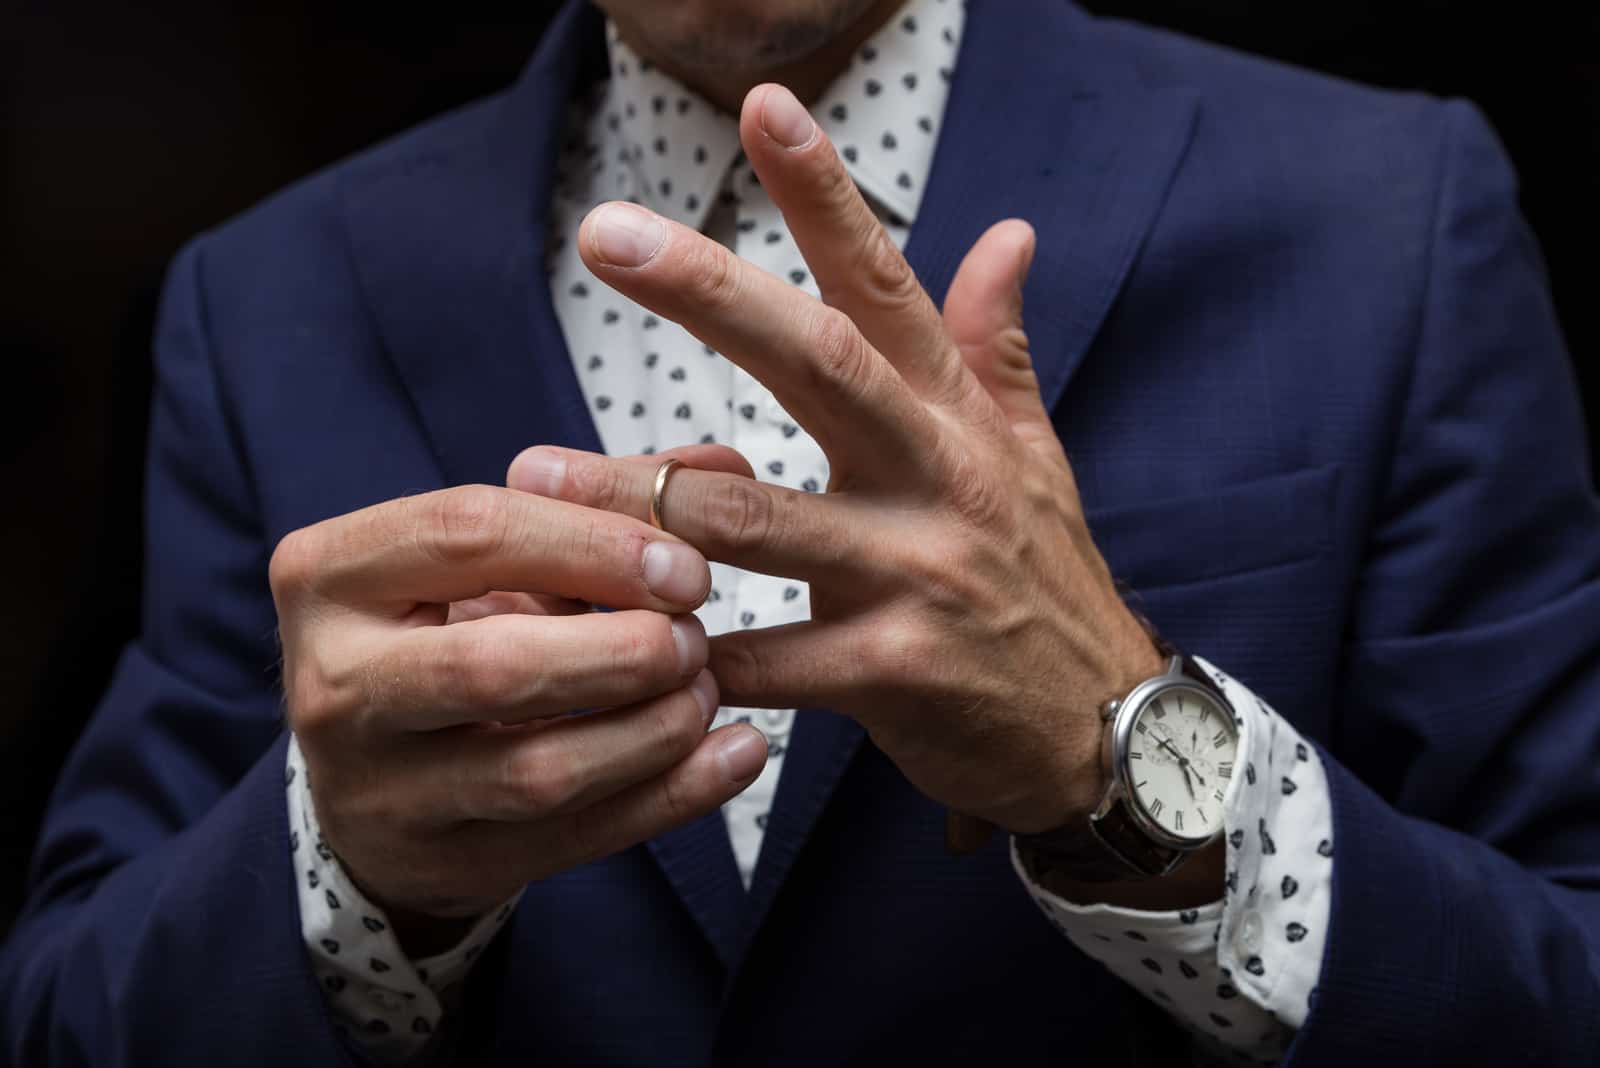 a man puts a wedding ring on his finger